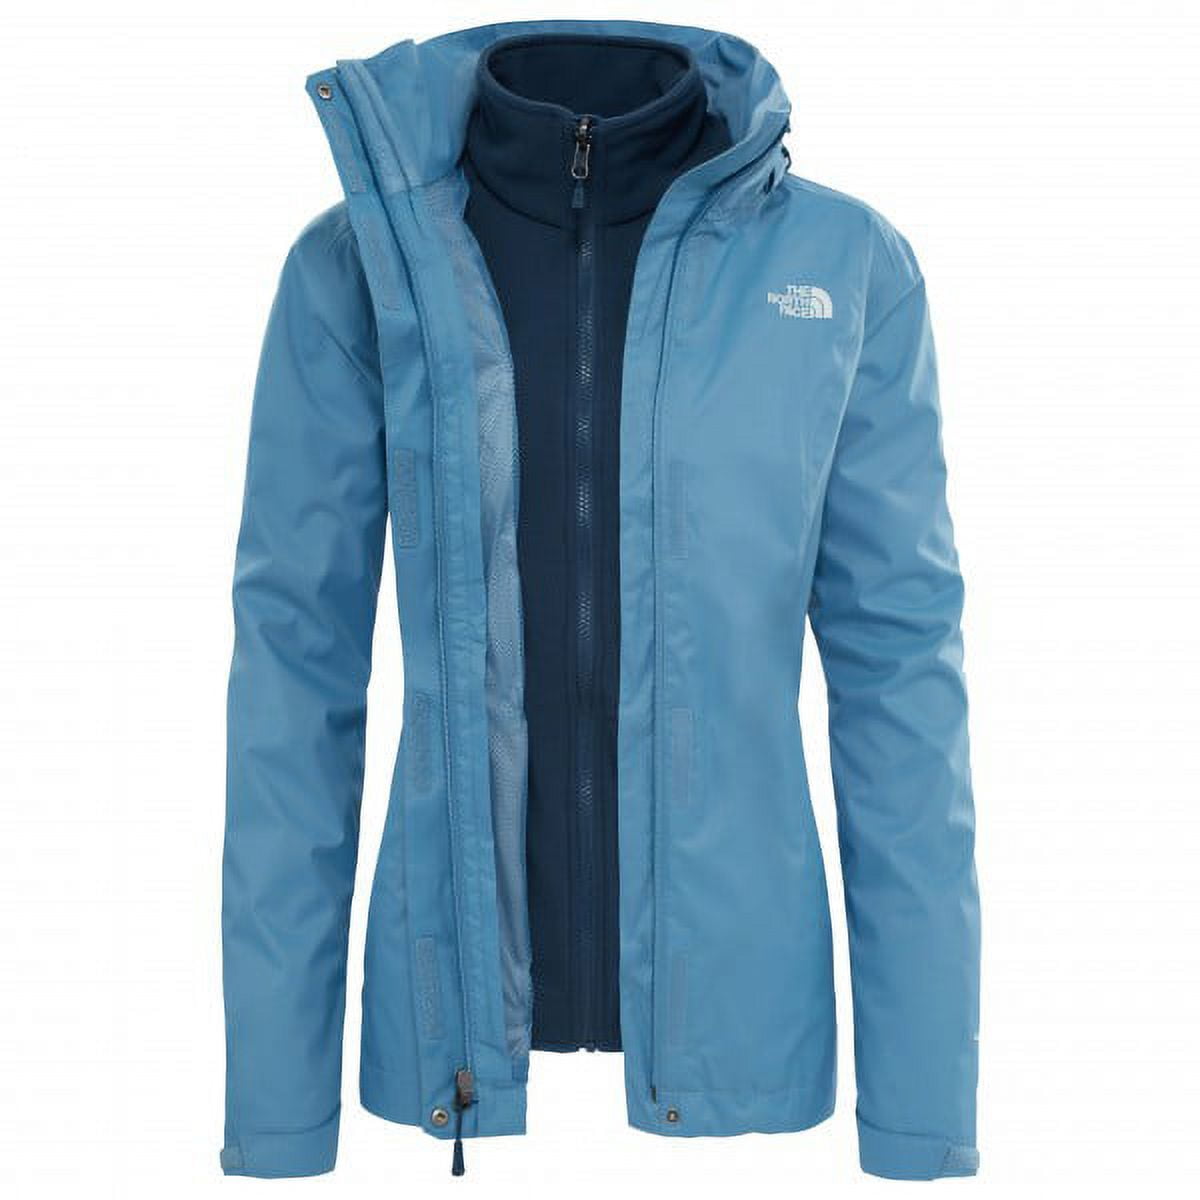 The North Face Womens Evolve 2 Triclimate Jacket (Provincial Blue, Medium)